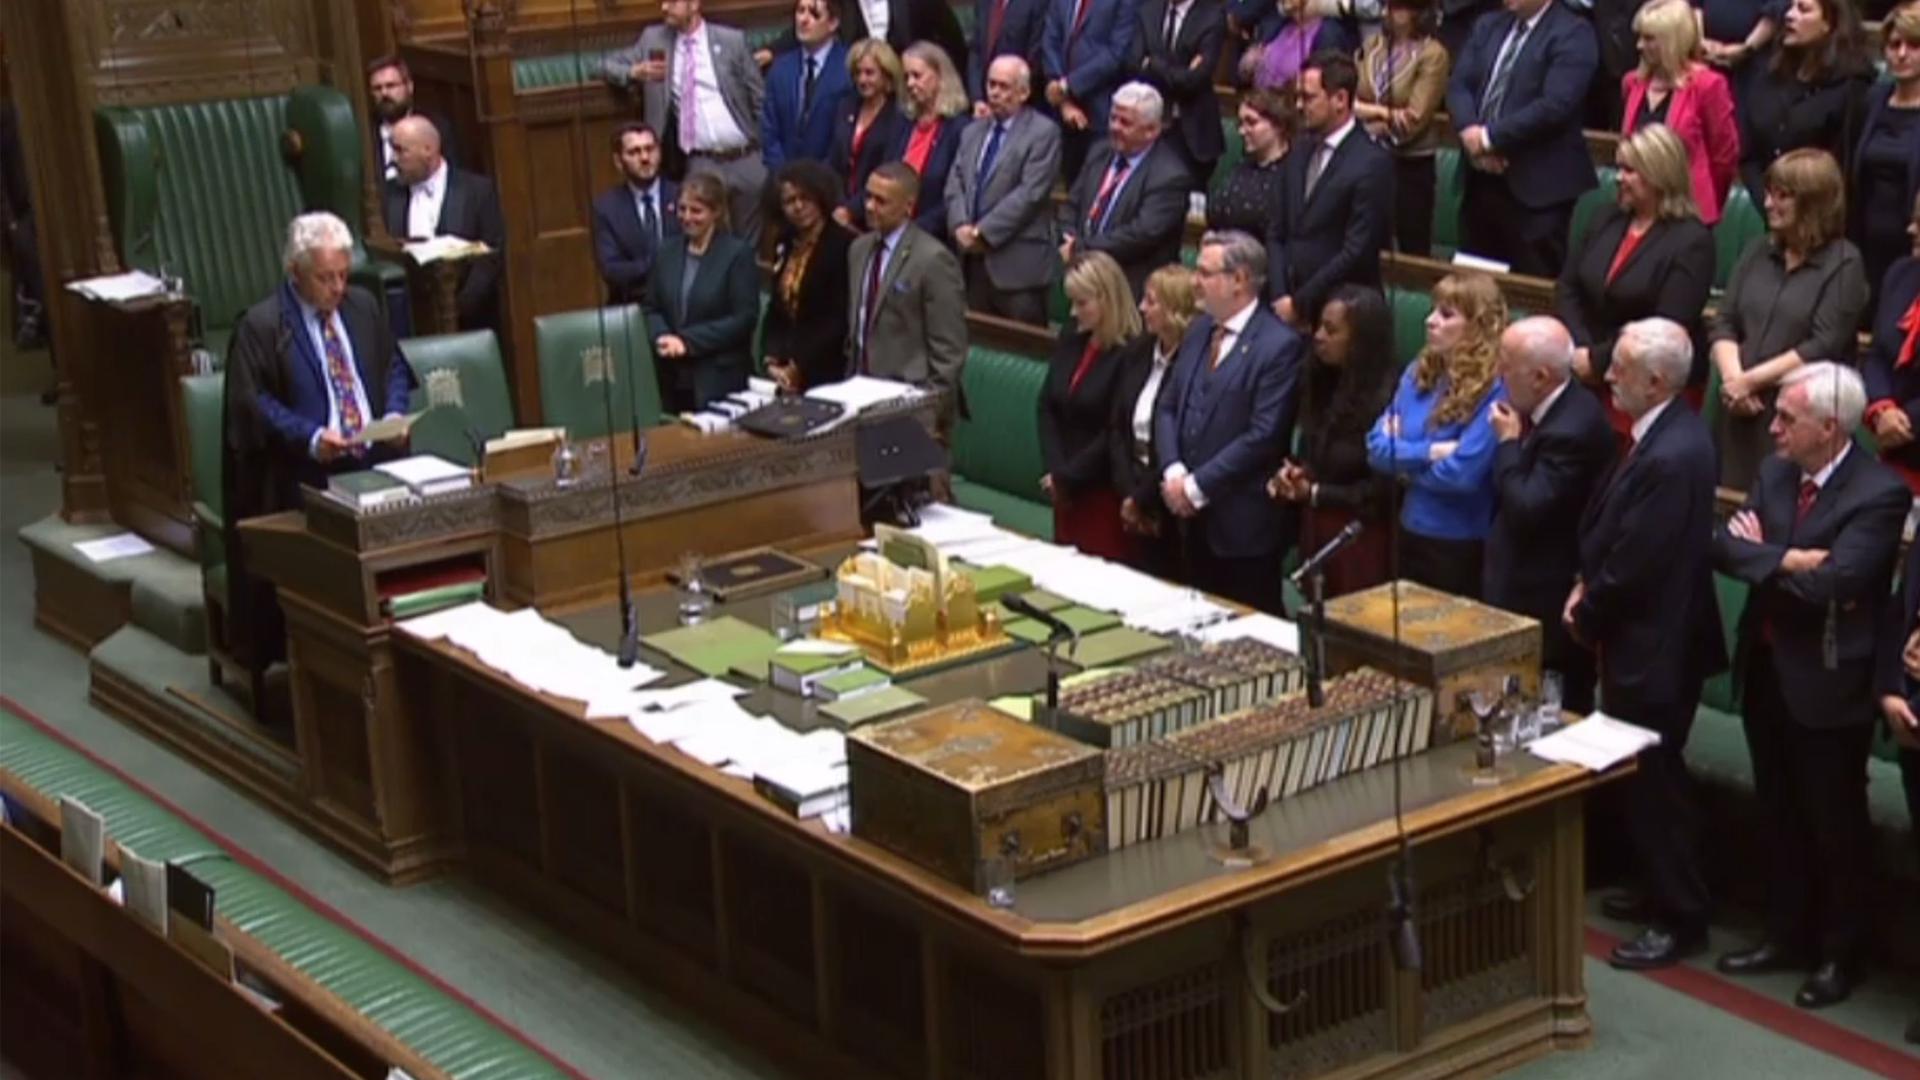 A video grab from footage broadcast by the UK Parliament's Parliamentary Recording Unit (PRU) shows Speaker of the House of Commons John Bercow (L) reading the address from the Queen that was just read by the Speaker of the House of Lords in the House of Commons in London on September 10, 2019, after the ceremony to prorogue (suspend) parliament. - The UK Parliament was prorogued, or suspended, until October 14, 2019. (Photo by HO / various sources / AFP) / RESTRICTED TO EDITORIAL USE - MANDATORY CREDIT " AFP PHOTO / PRU " - NO USE FOR ENTERTAINMENT, SATIRICAL, MARKETING OR ADVERTISING CAMPAIGNS - EDITORS NOTE THE IMAGE HAS BEEN DIGITALLY ALTERED AT SOURCE TO OBSCURE VISIBLE DOCUMENTS